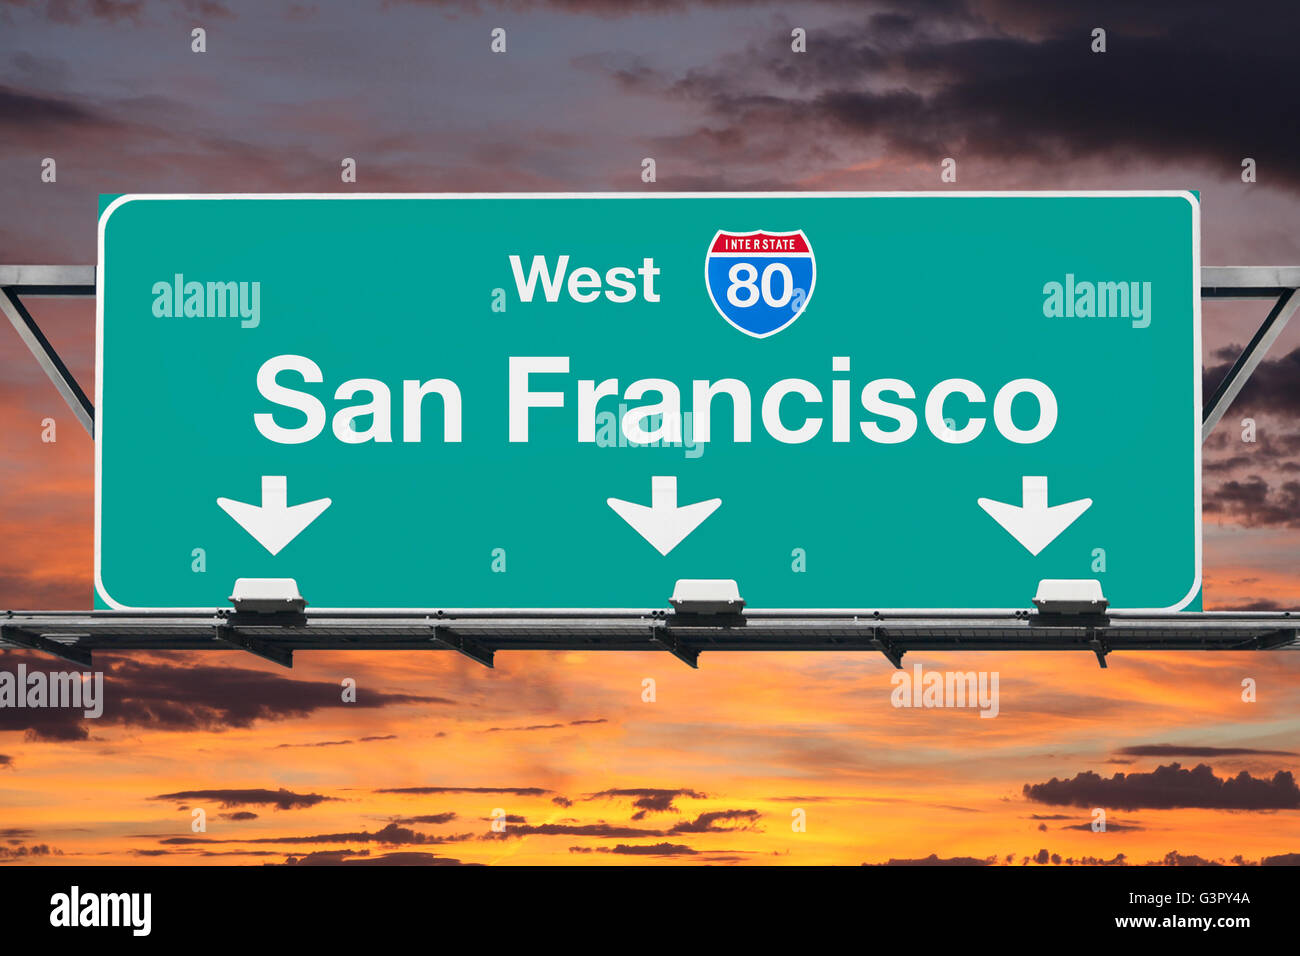 San Francisco Interstate 80 west highway sign with sunrise sky. Stock Photo